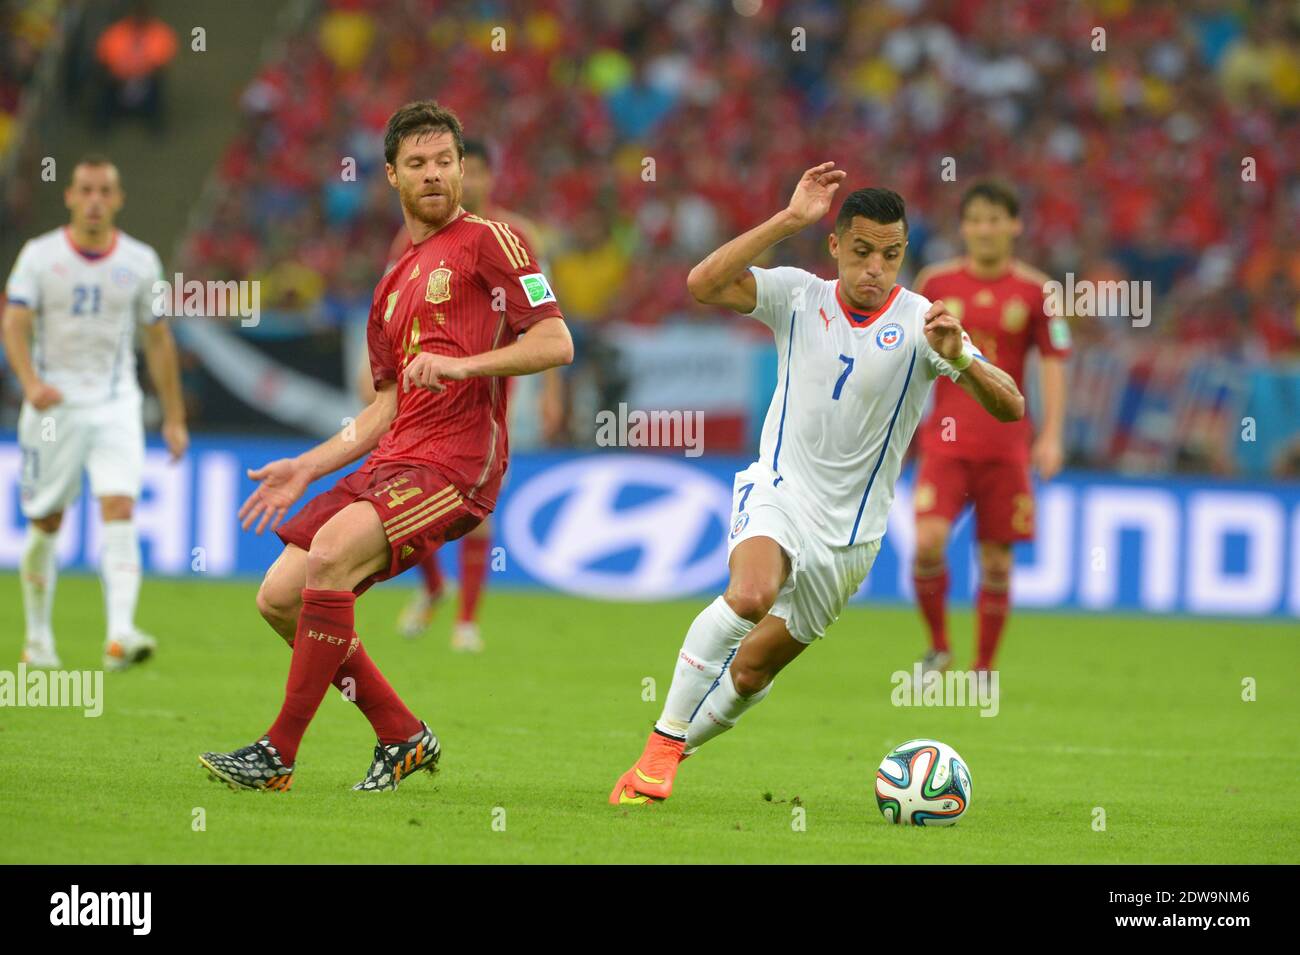 Spain's Xabi Alonso battling Chile's Alexis Sanchez during Soccer World Cup 2014 First round Group B match Spain v Chile at Maracana Stadium, Rio de Janeiro, Brazil , on June 18, 2014. Chile won 2-0 and ousted the defending champions from the competition. Photo by Henri Szwarc/ABACAPRESS.COM Stock Photo